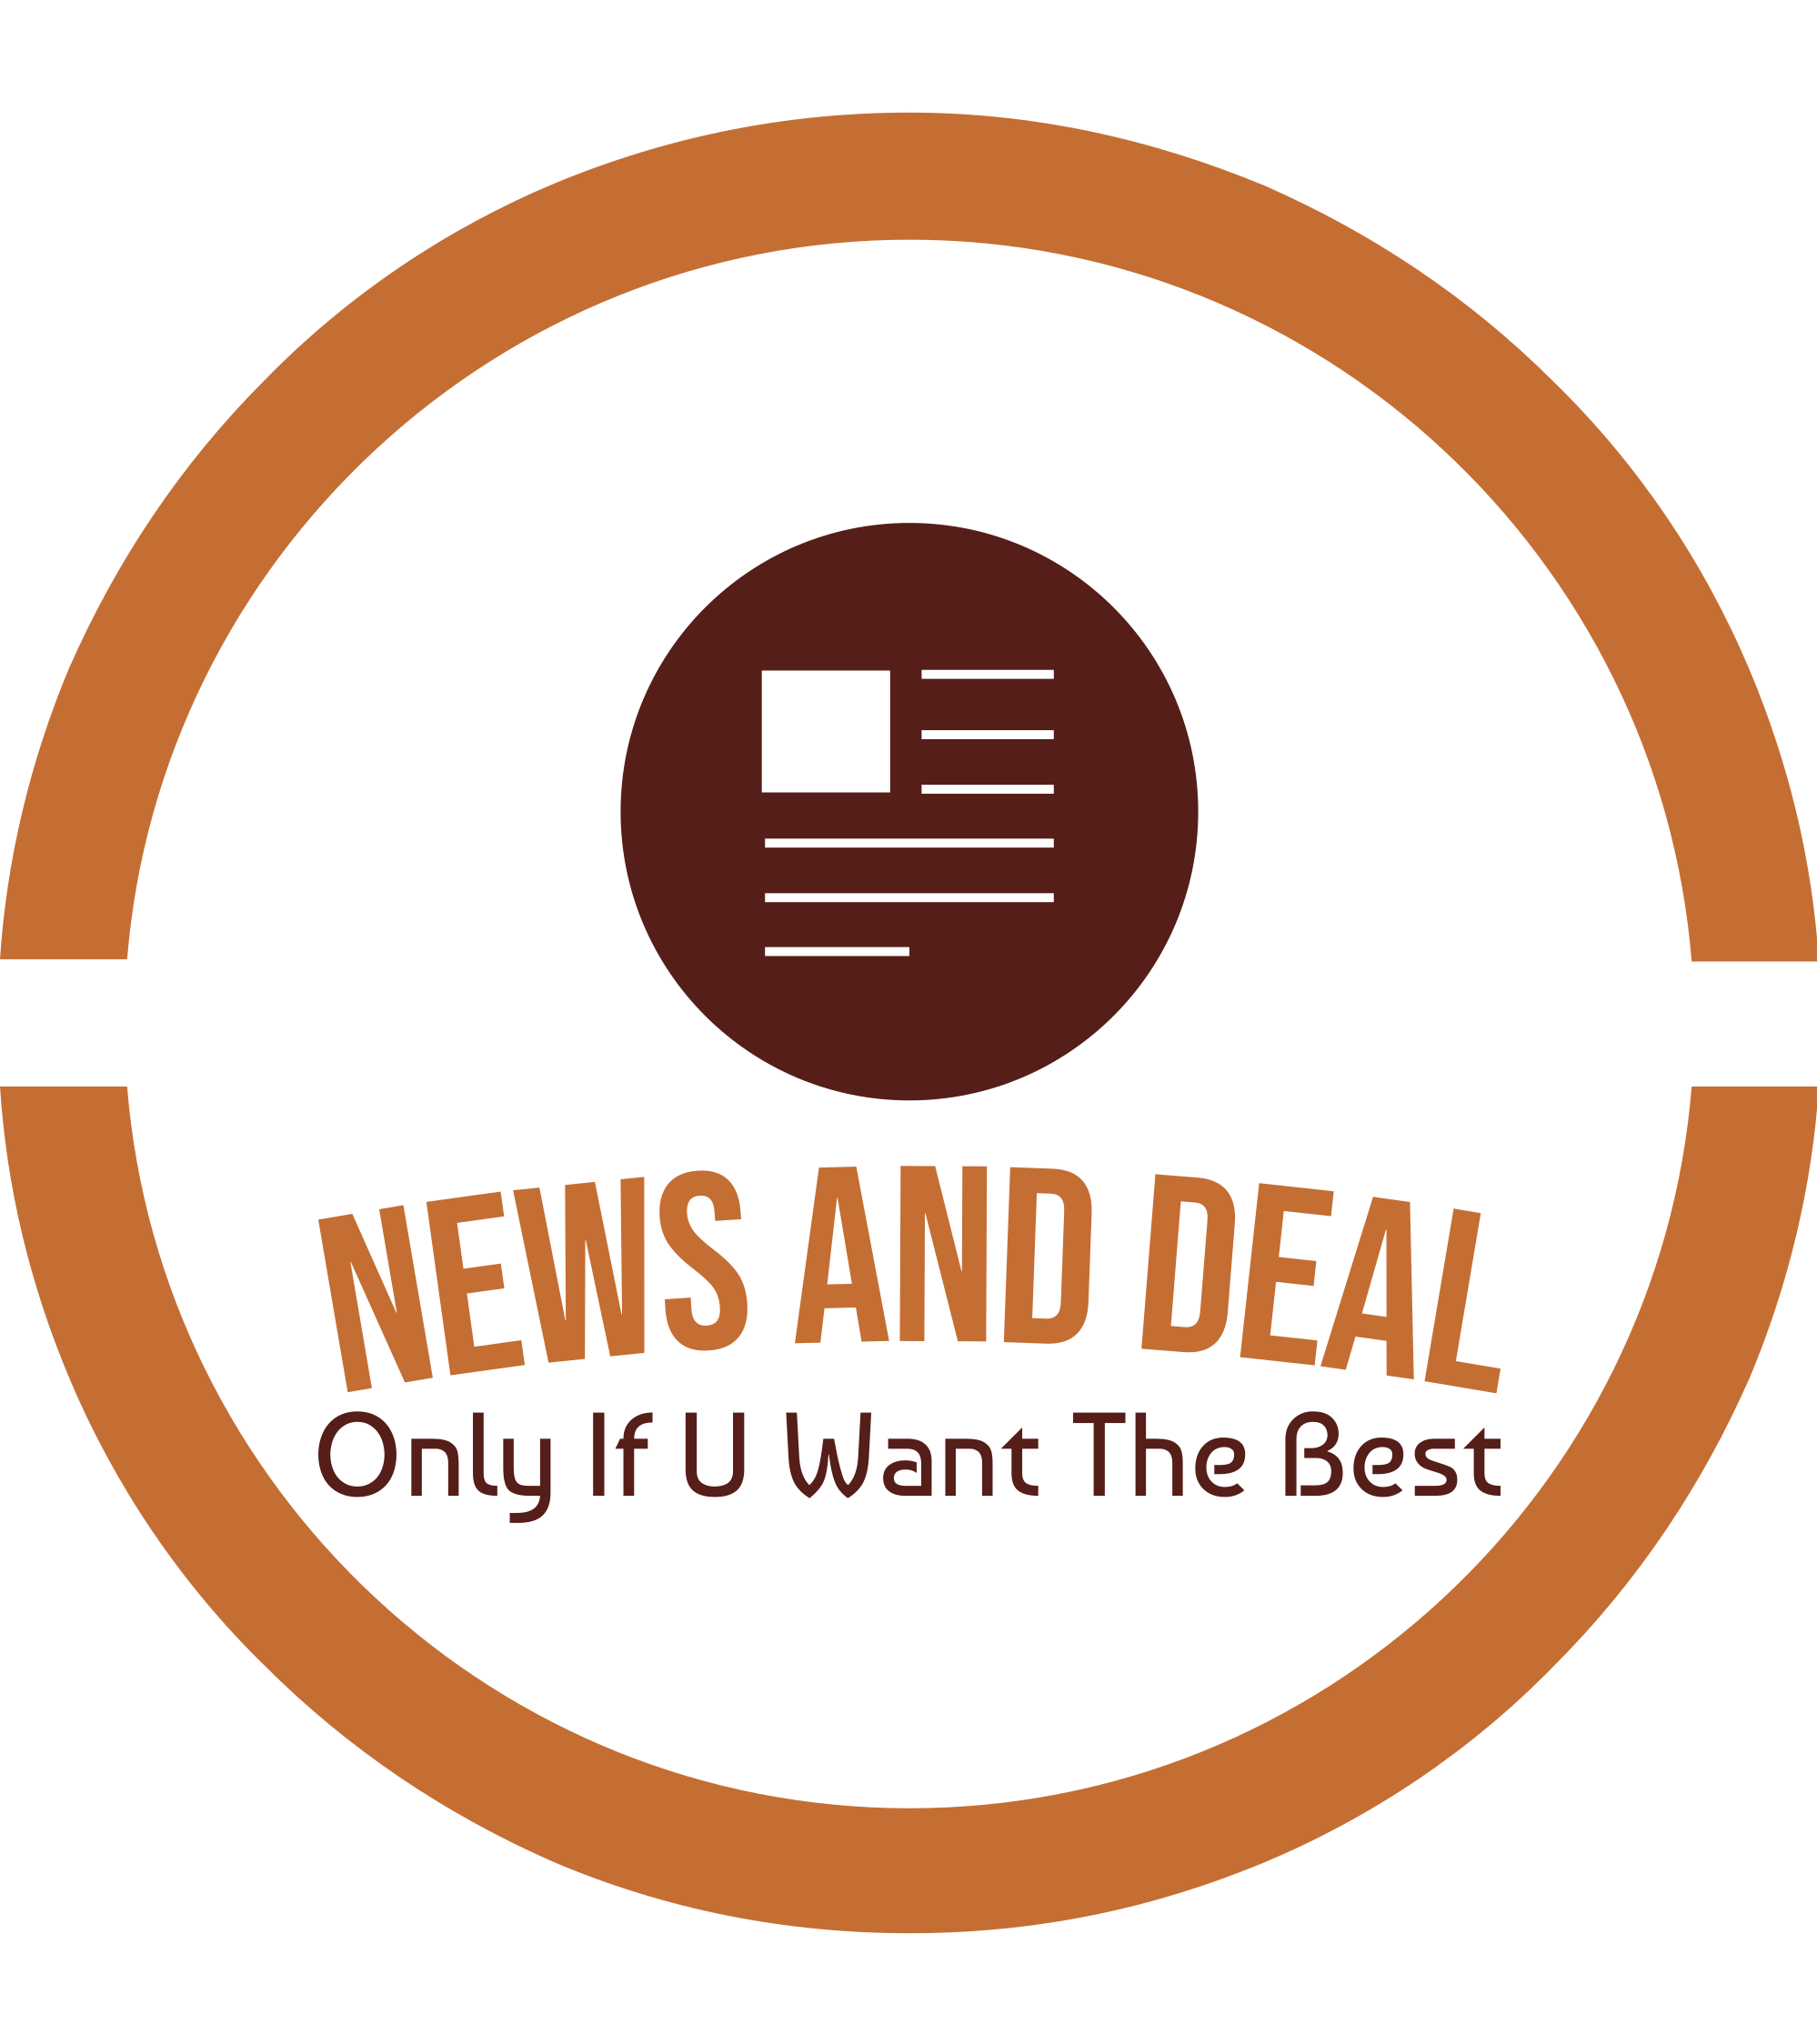 News And Deal